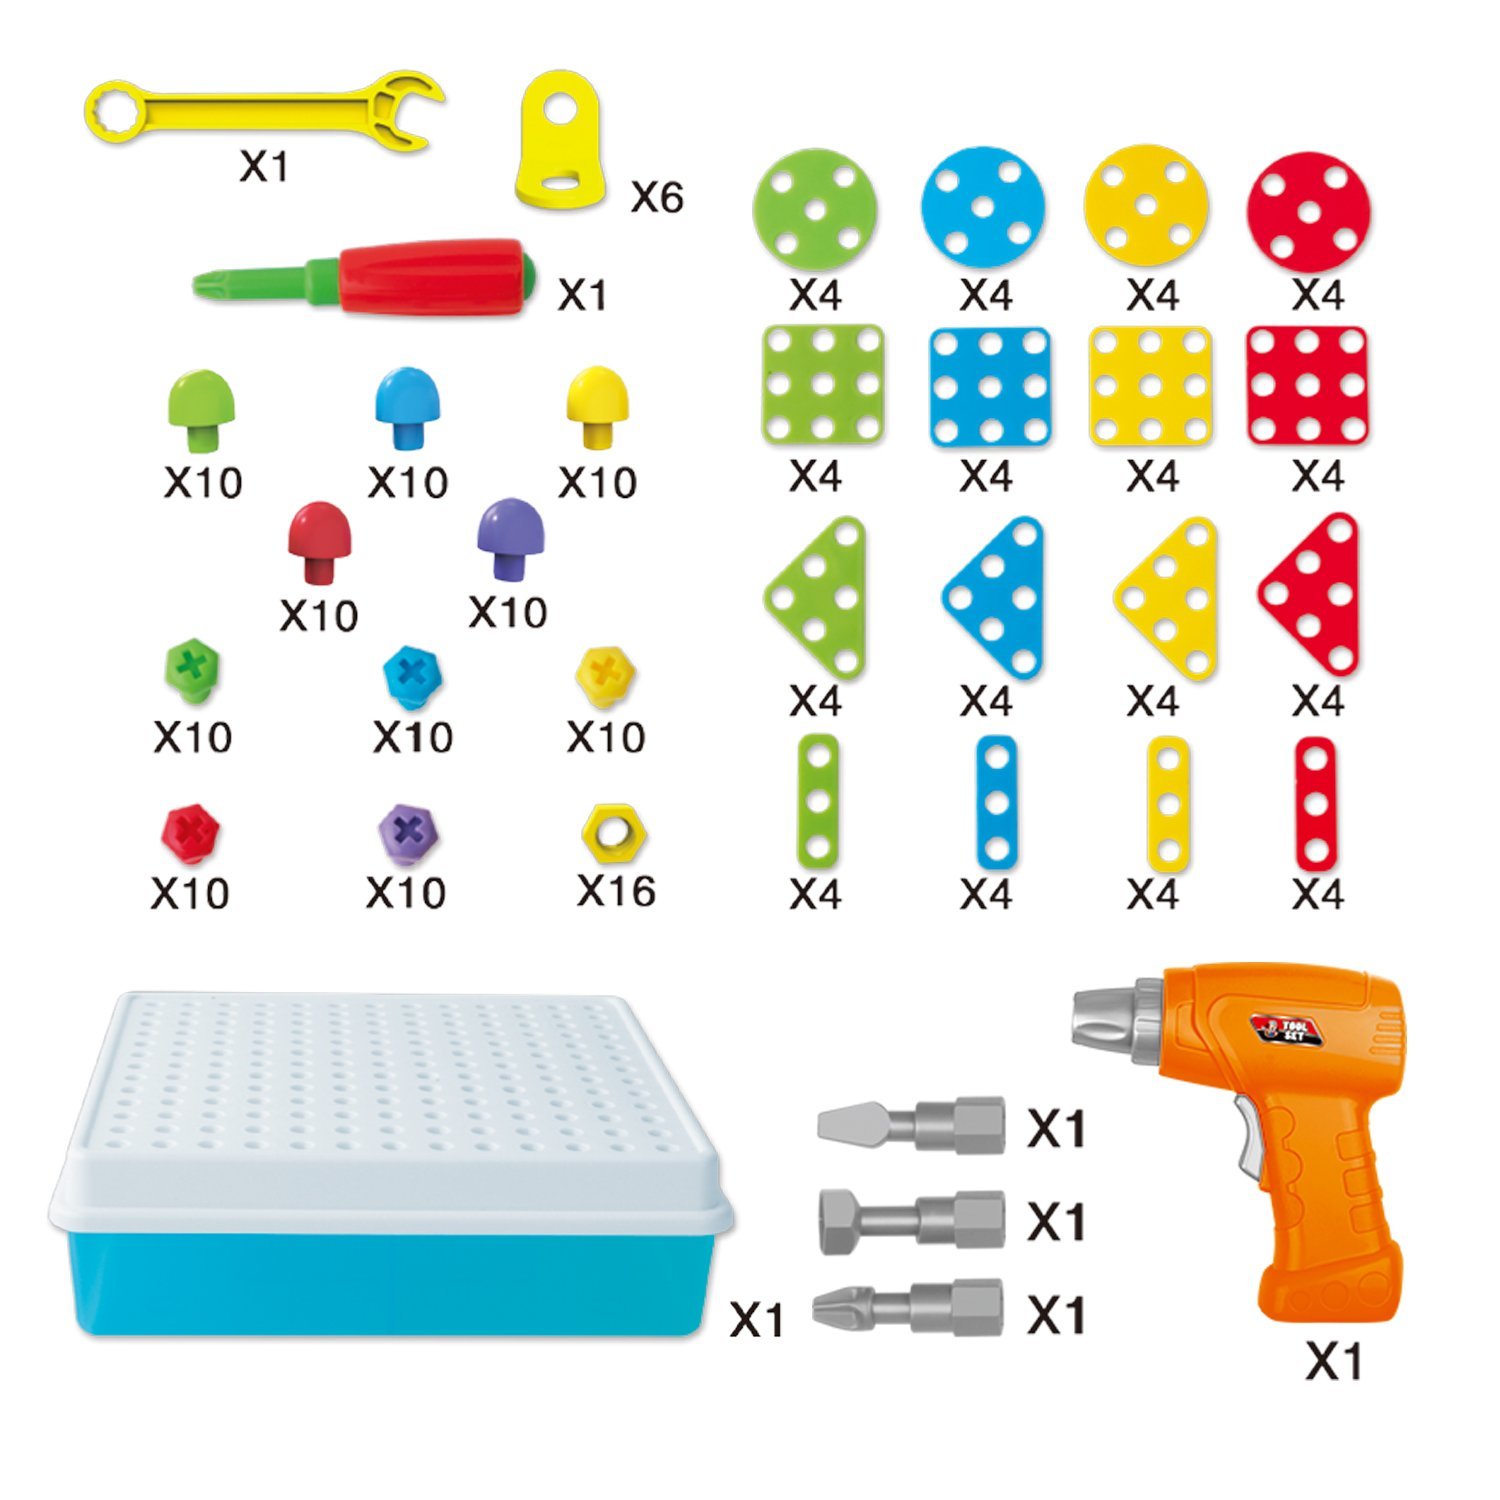 Educational Design and Drill toy Building toys set - 193 Pcs with board game STEM Learning Construction creative playset for 3, 4, 5+ Year Old Boys & Girls Best Toy Gift for Kids Ages 3yr – 6yr & up - image 5 of 7